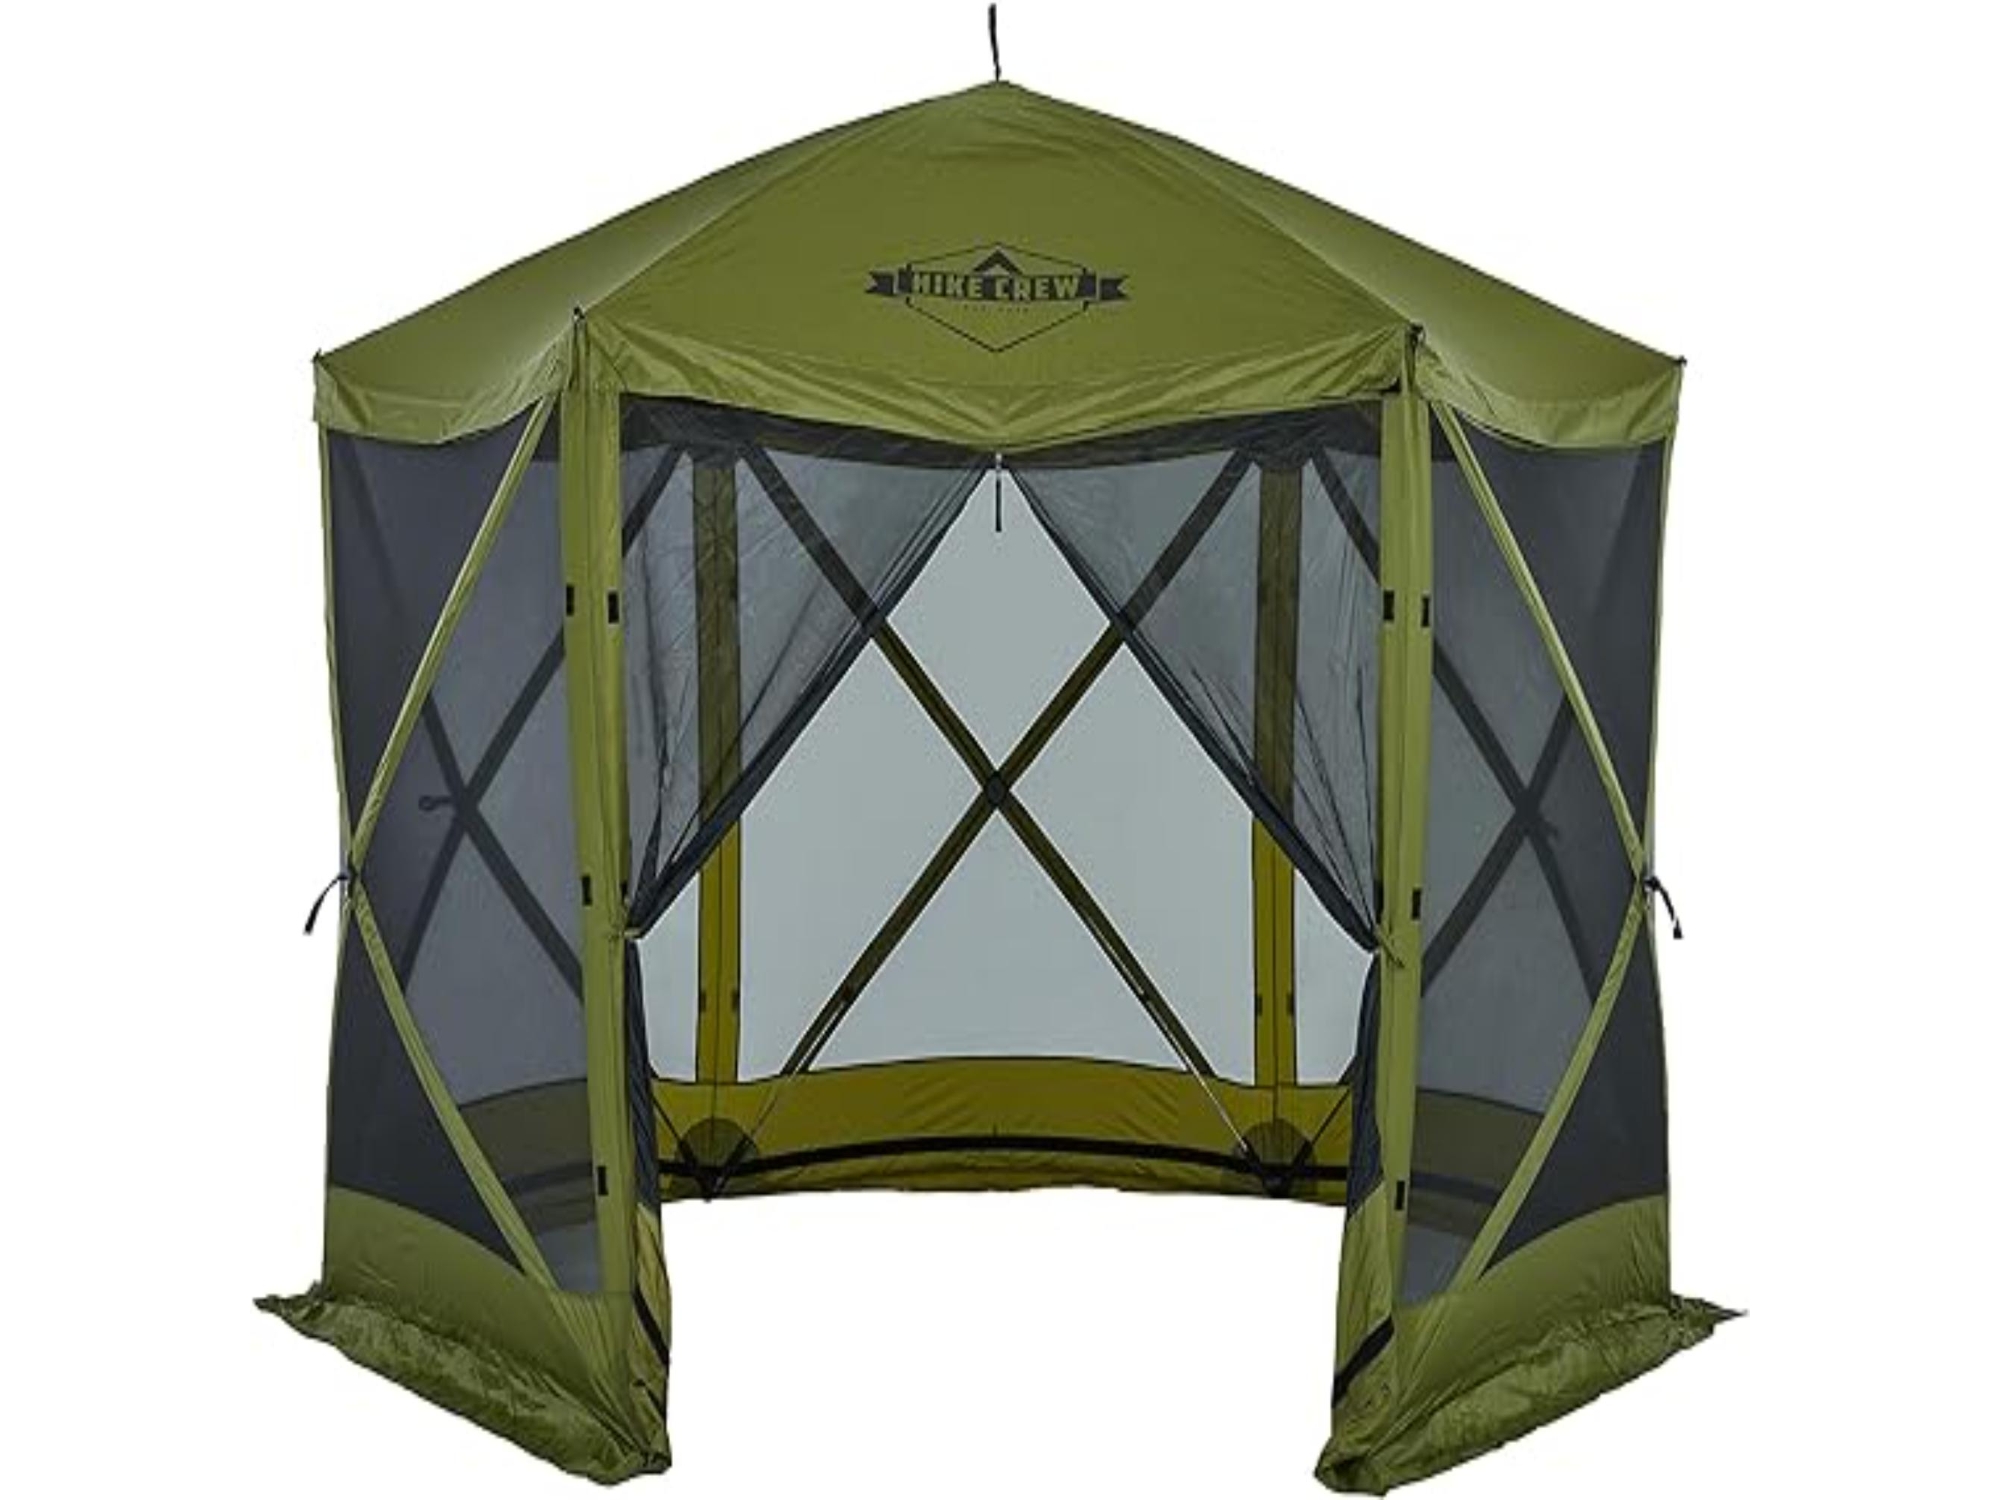 Image of Hike Crew 12 x 12 Pop Up Gazebo 6-Sided Outdoor Tent Canopy Green ID 843812179669